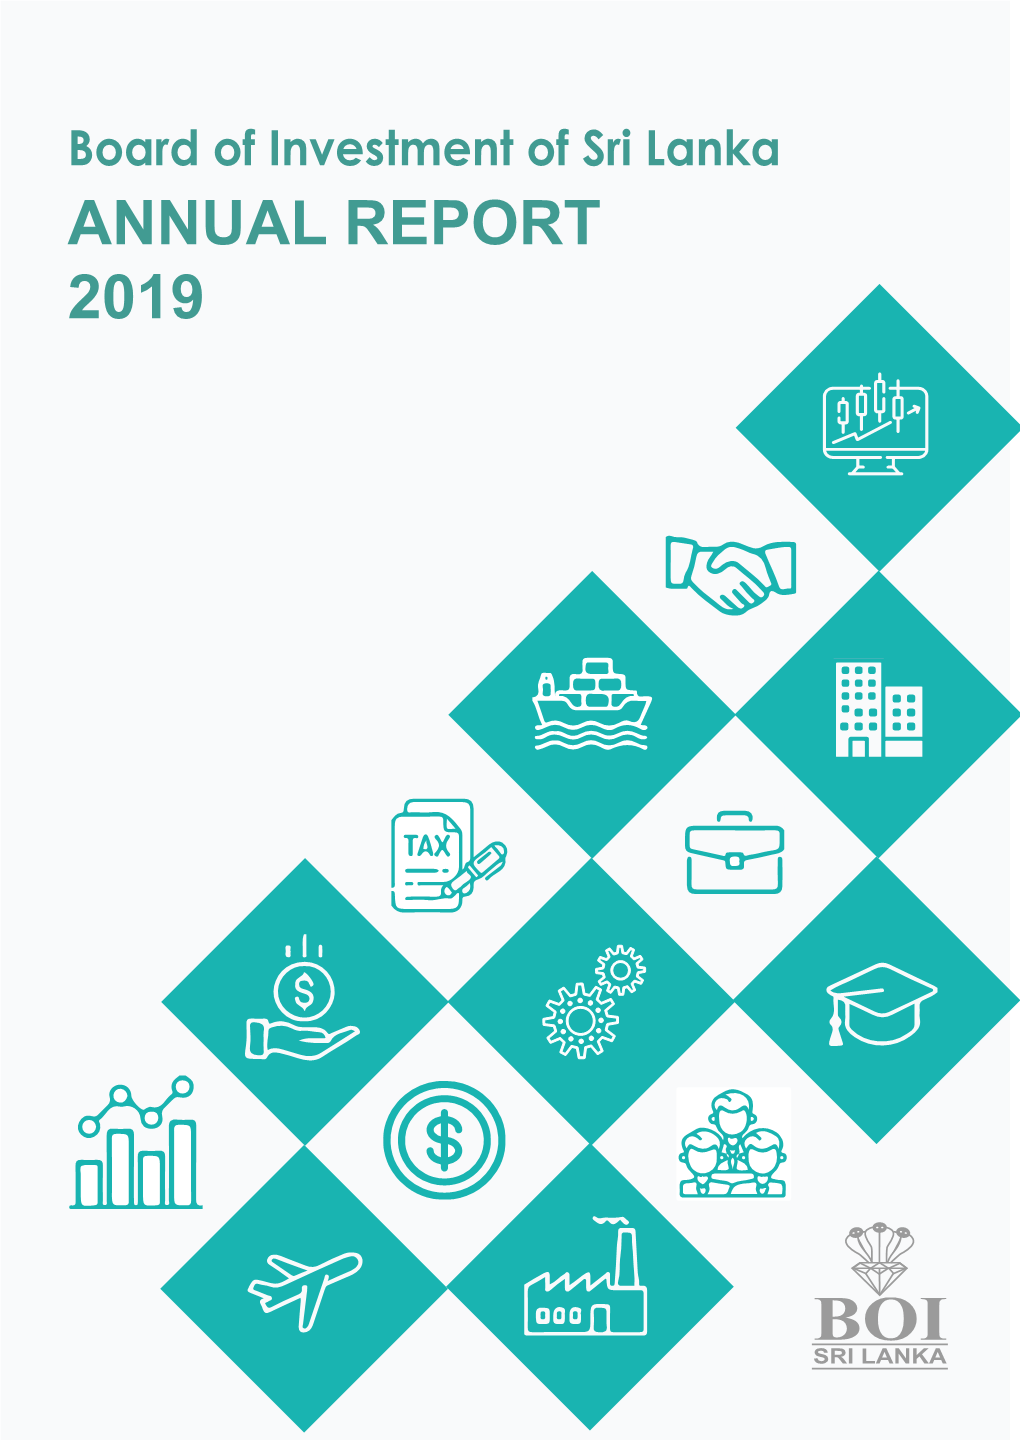 Annual Report of the Board of Investment of Sri Lanka for the Year 2019